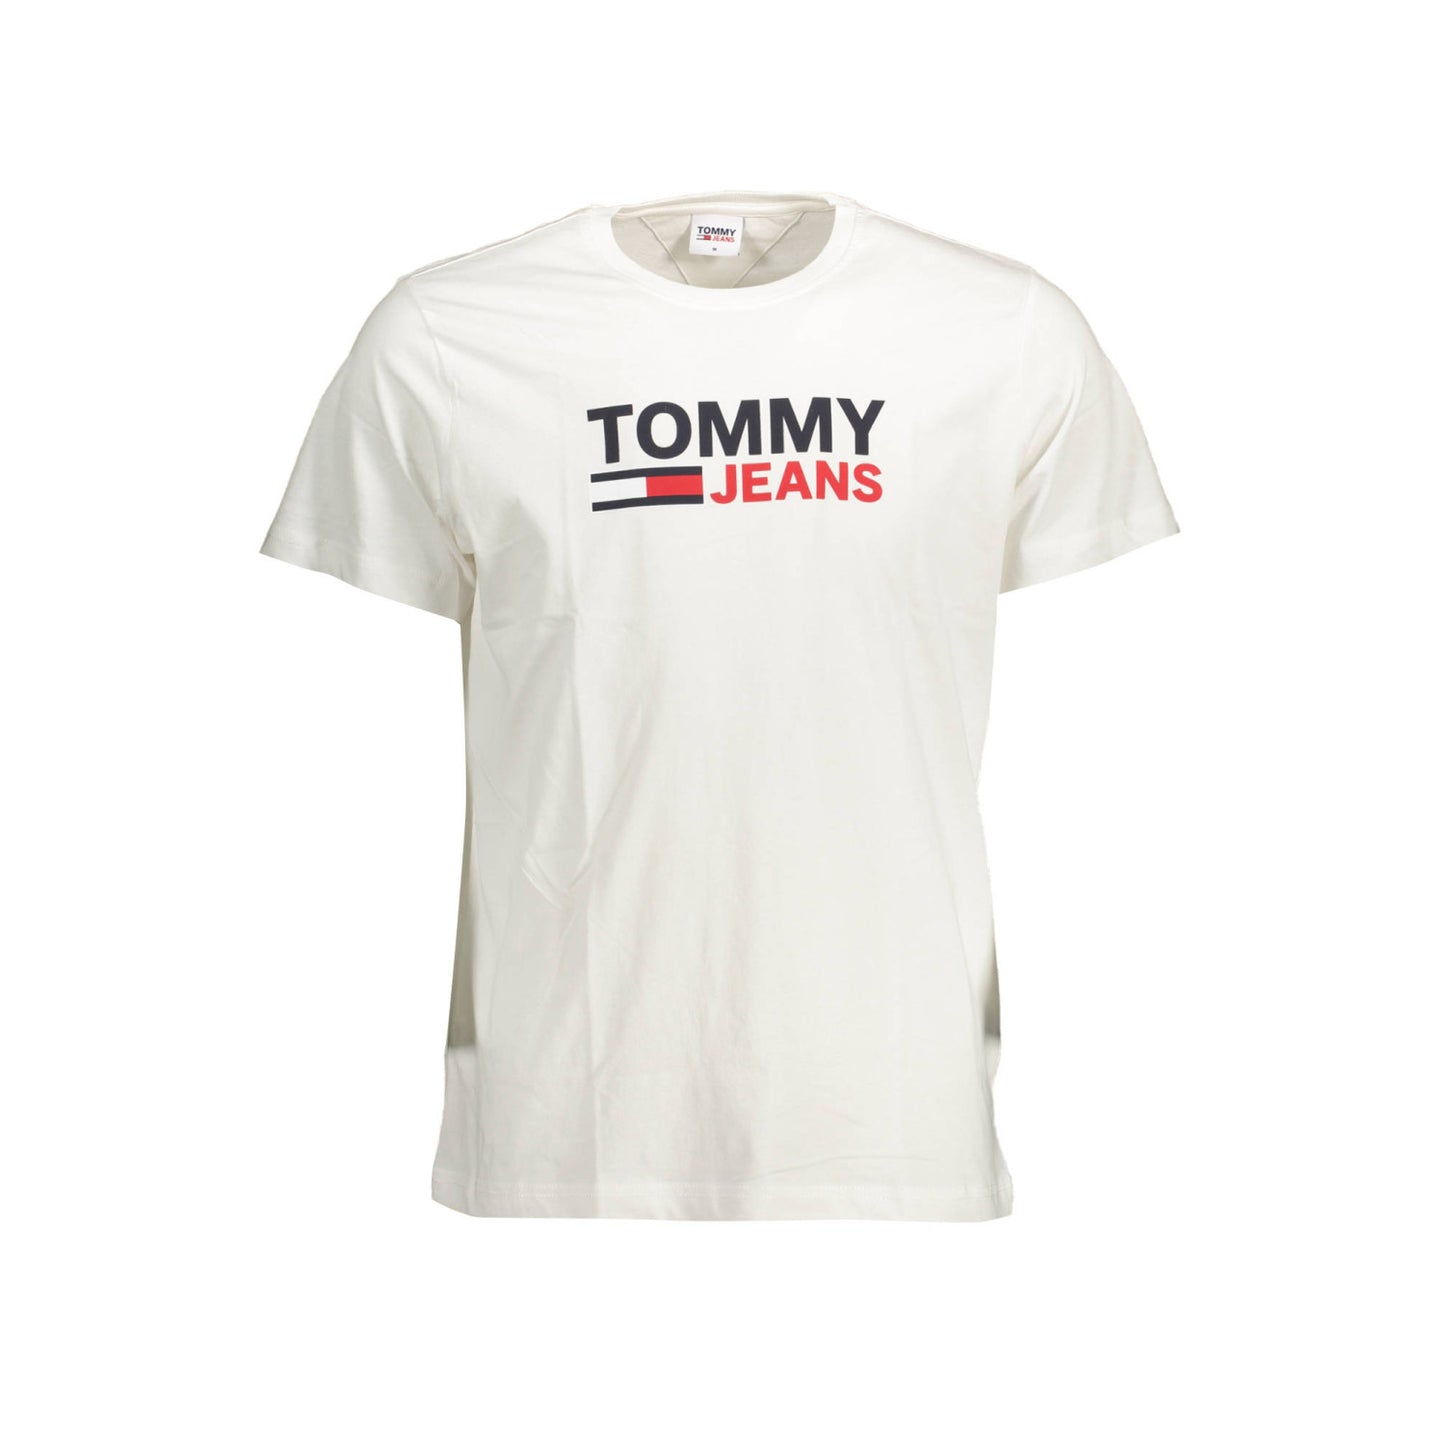 TOMMY HILFIGER T-SHIRT WITH LOGO